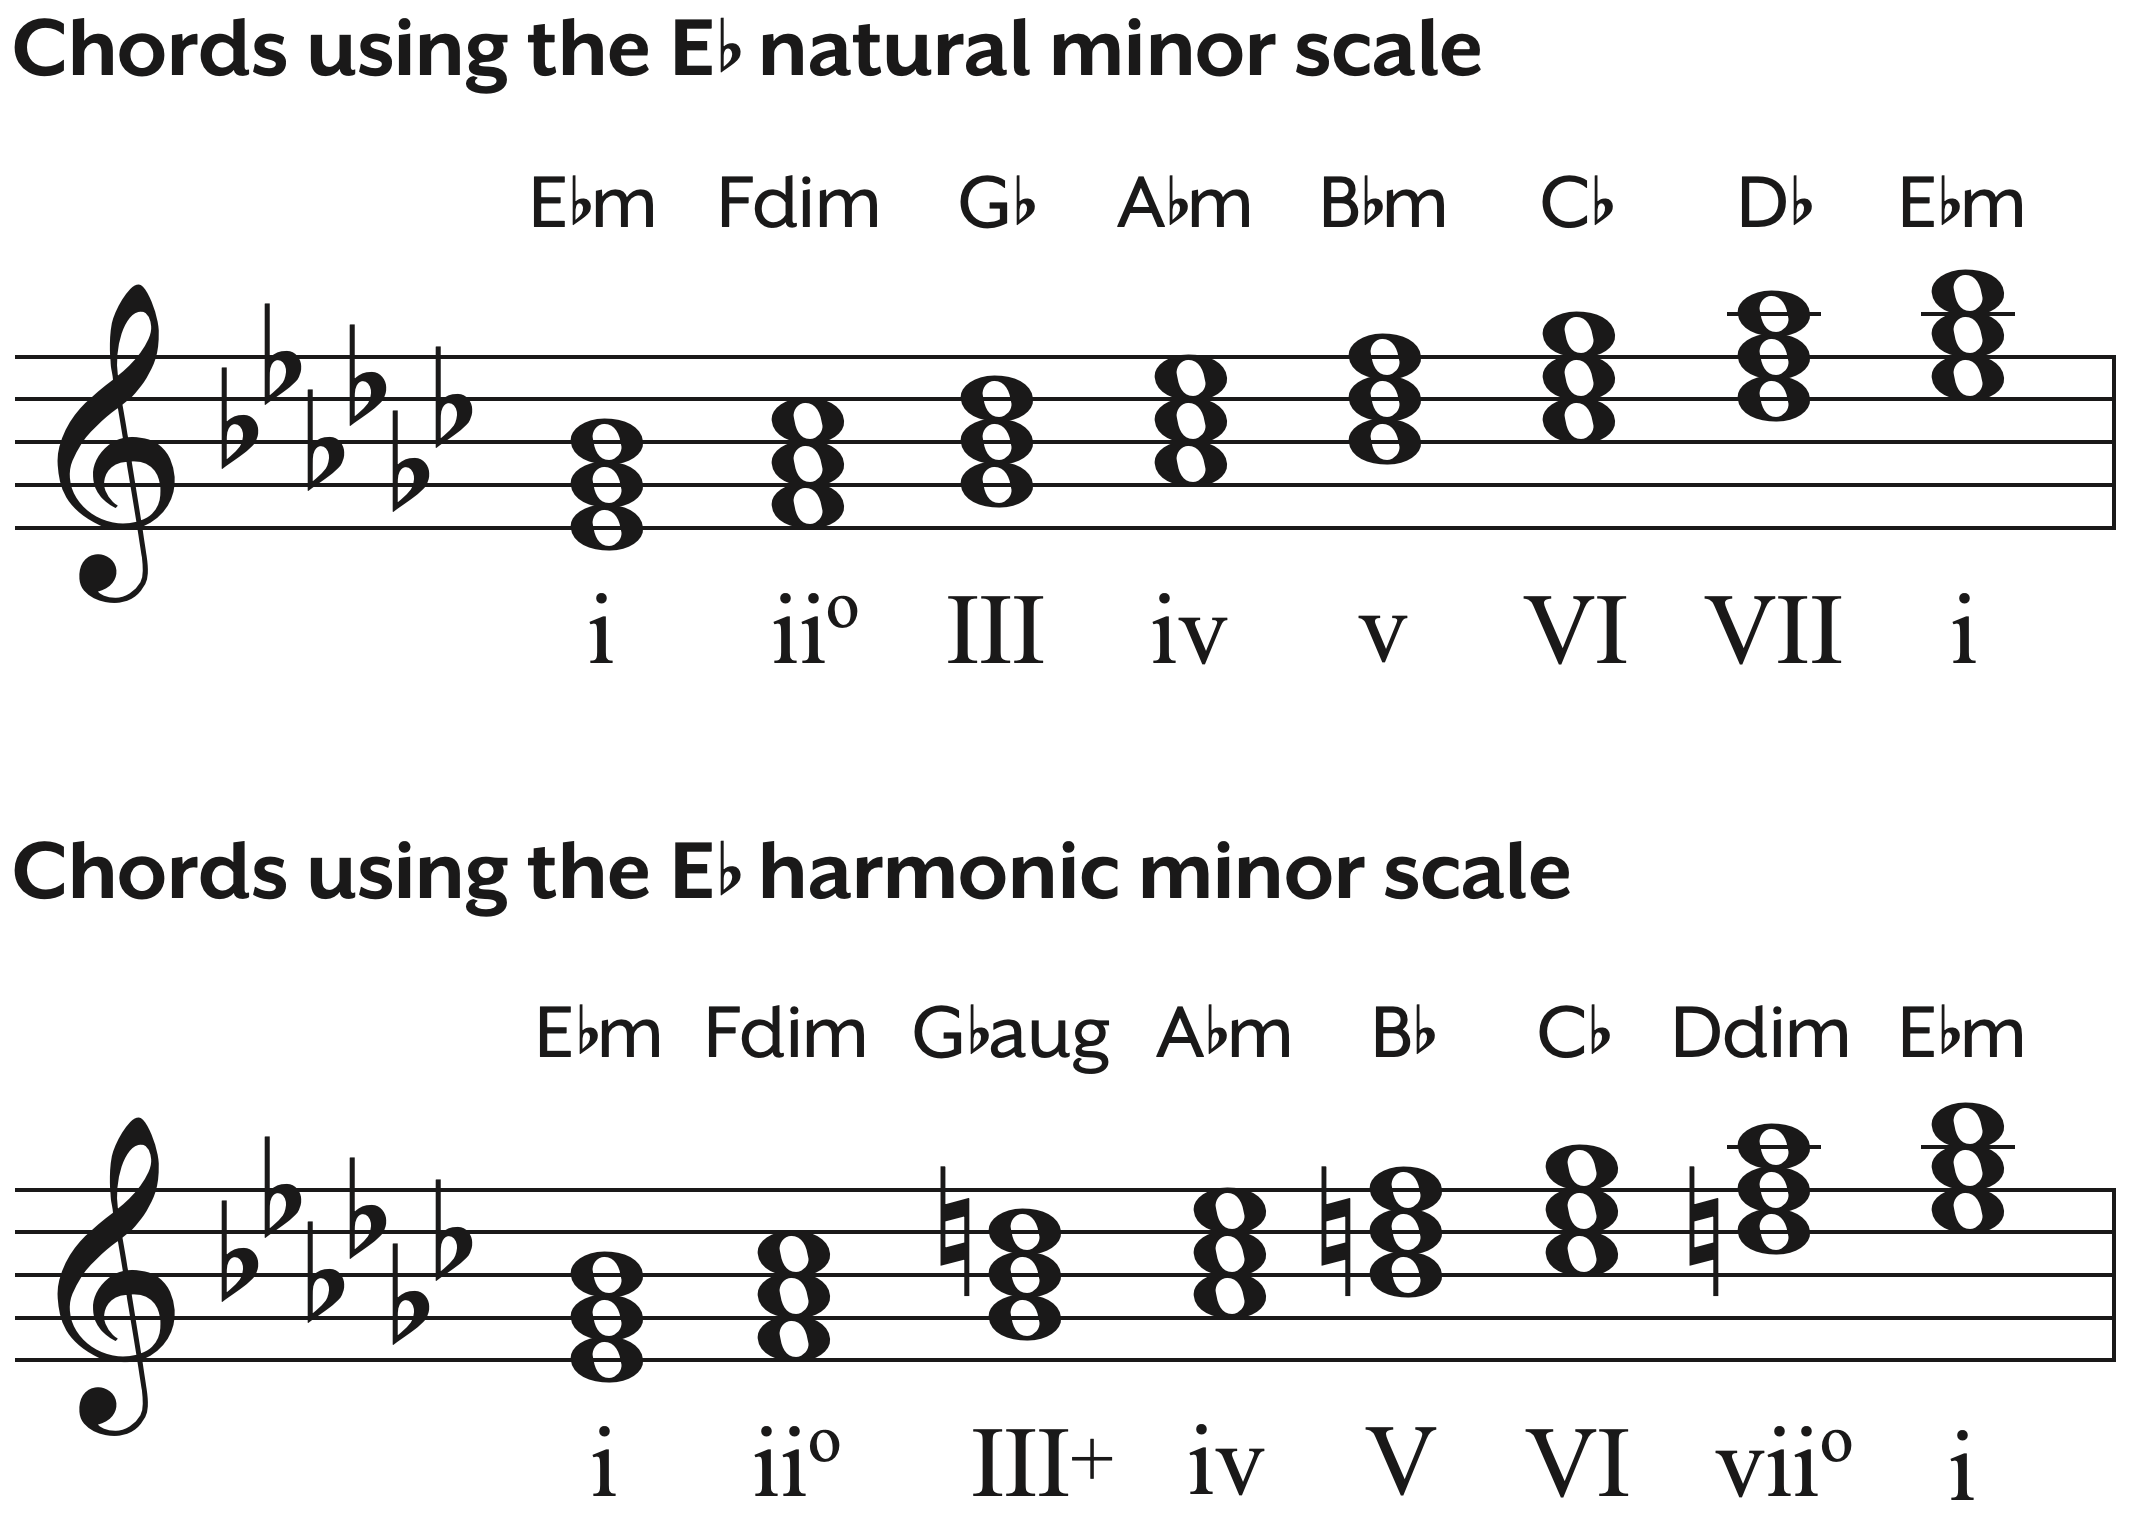 Chords using the E-flat natural minor scale